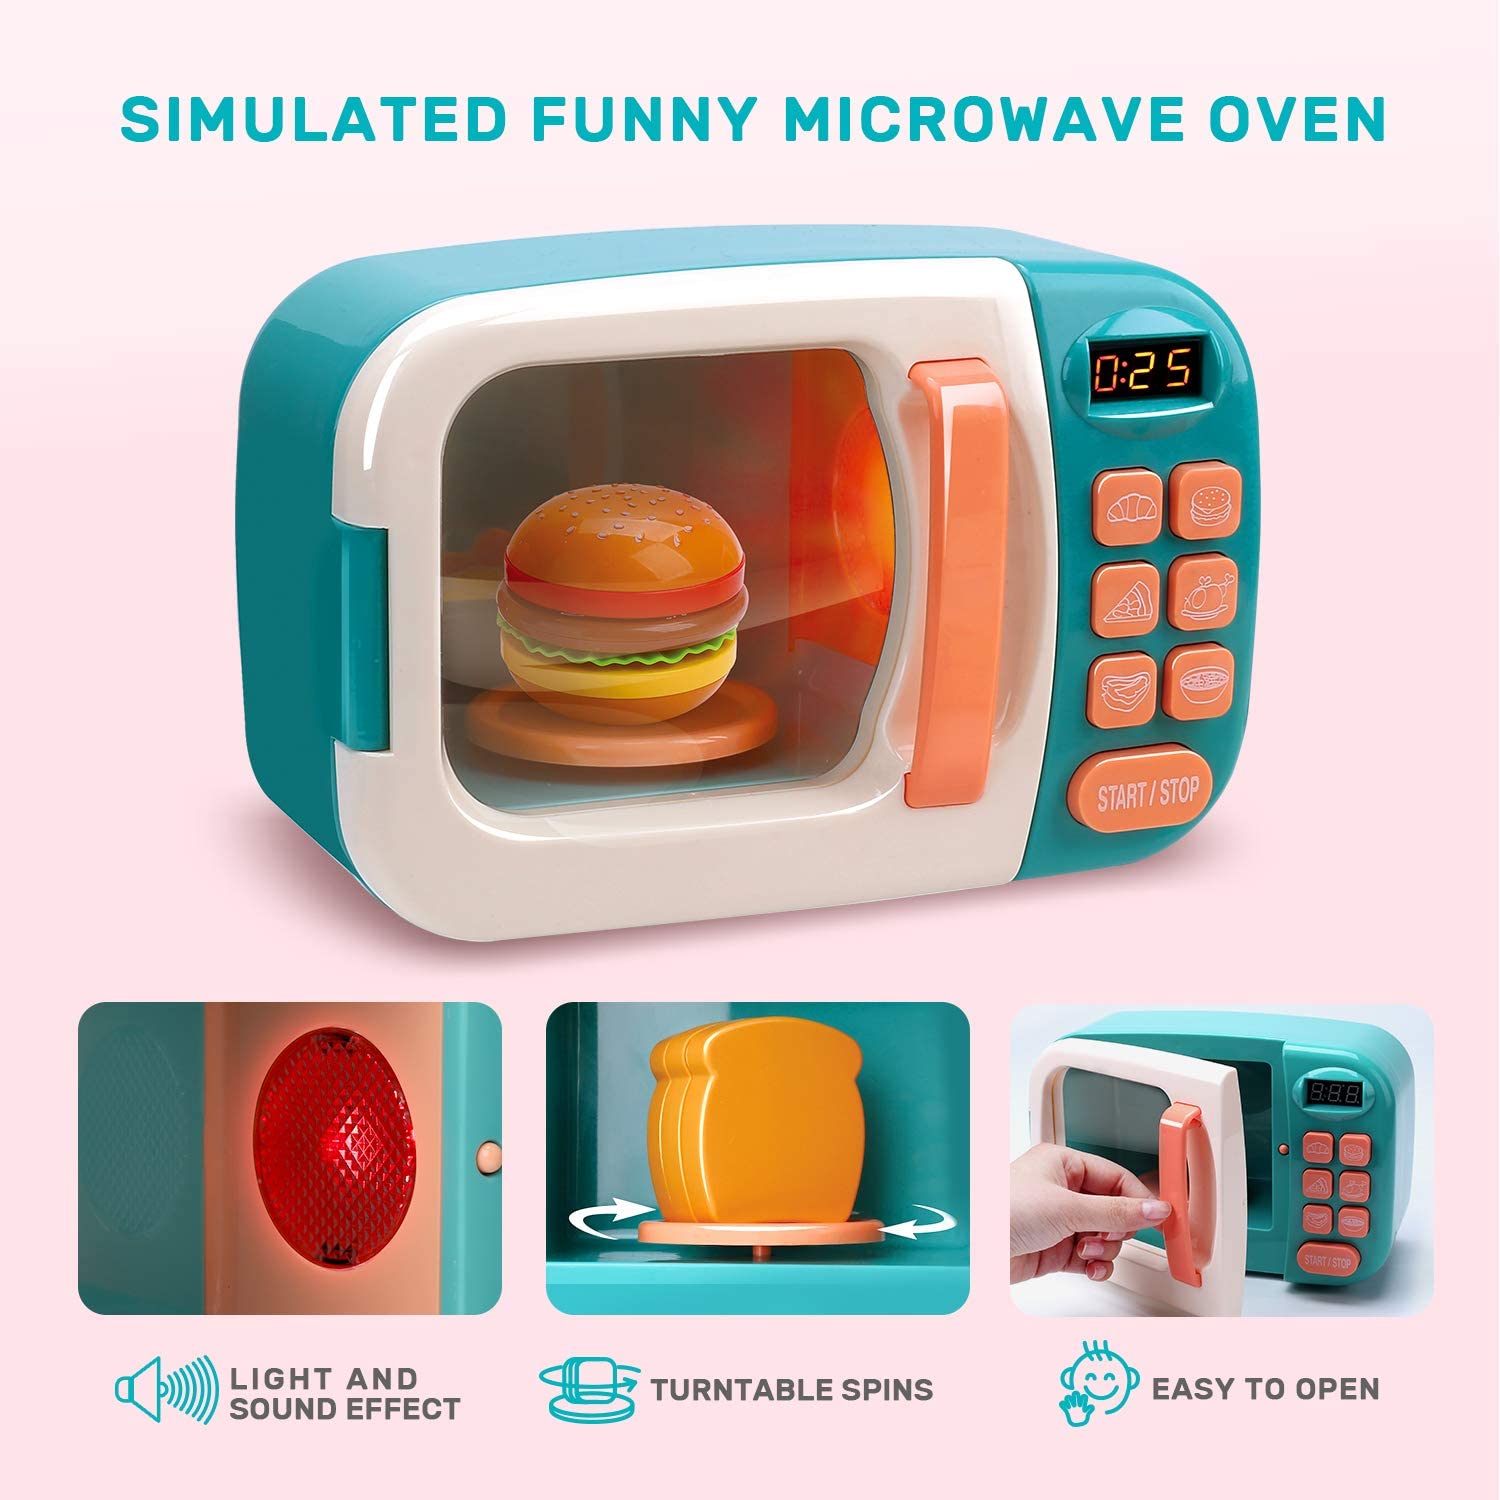 CUTE STONE Microwave Toys Kitchen Play Set Kids Pretend Electronic Oven Cookware